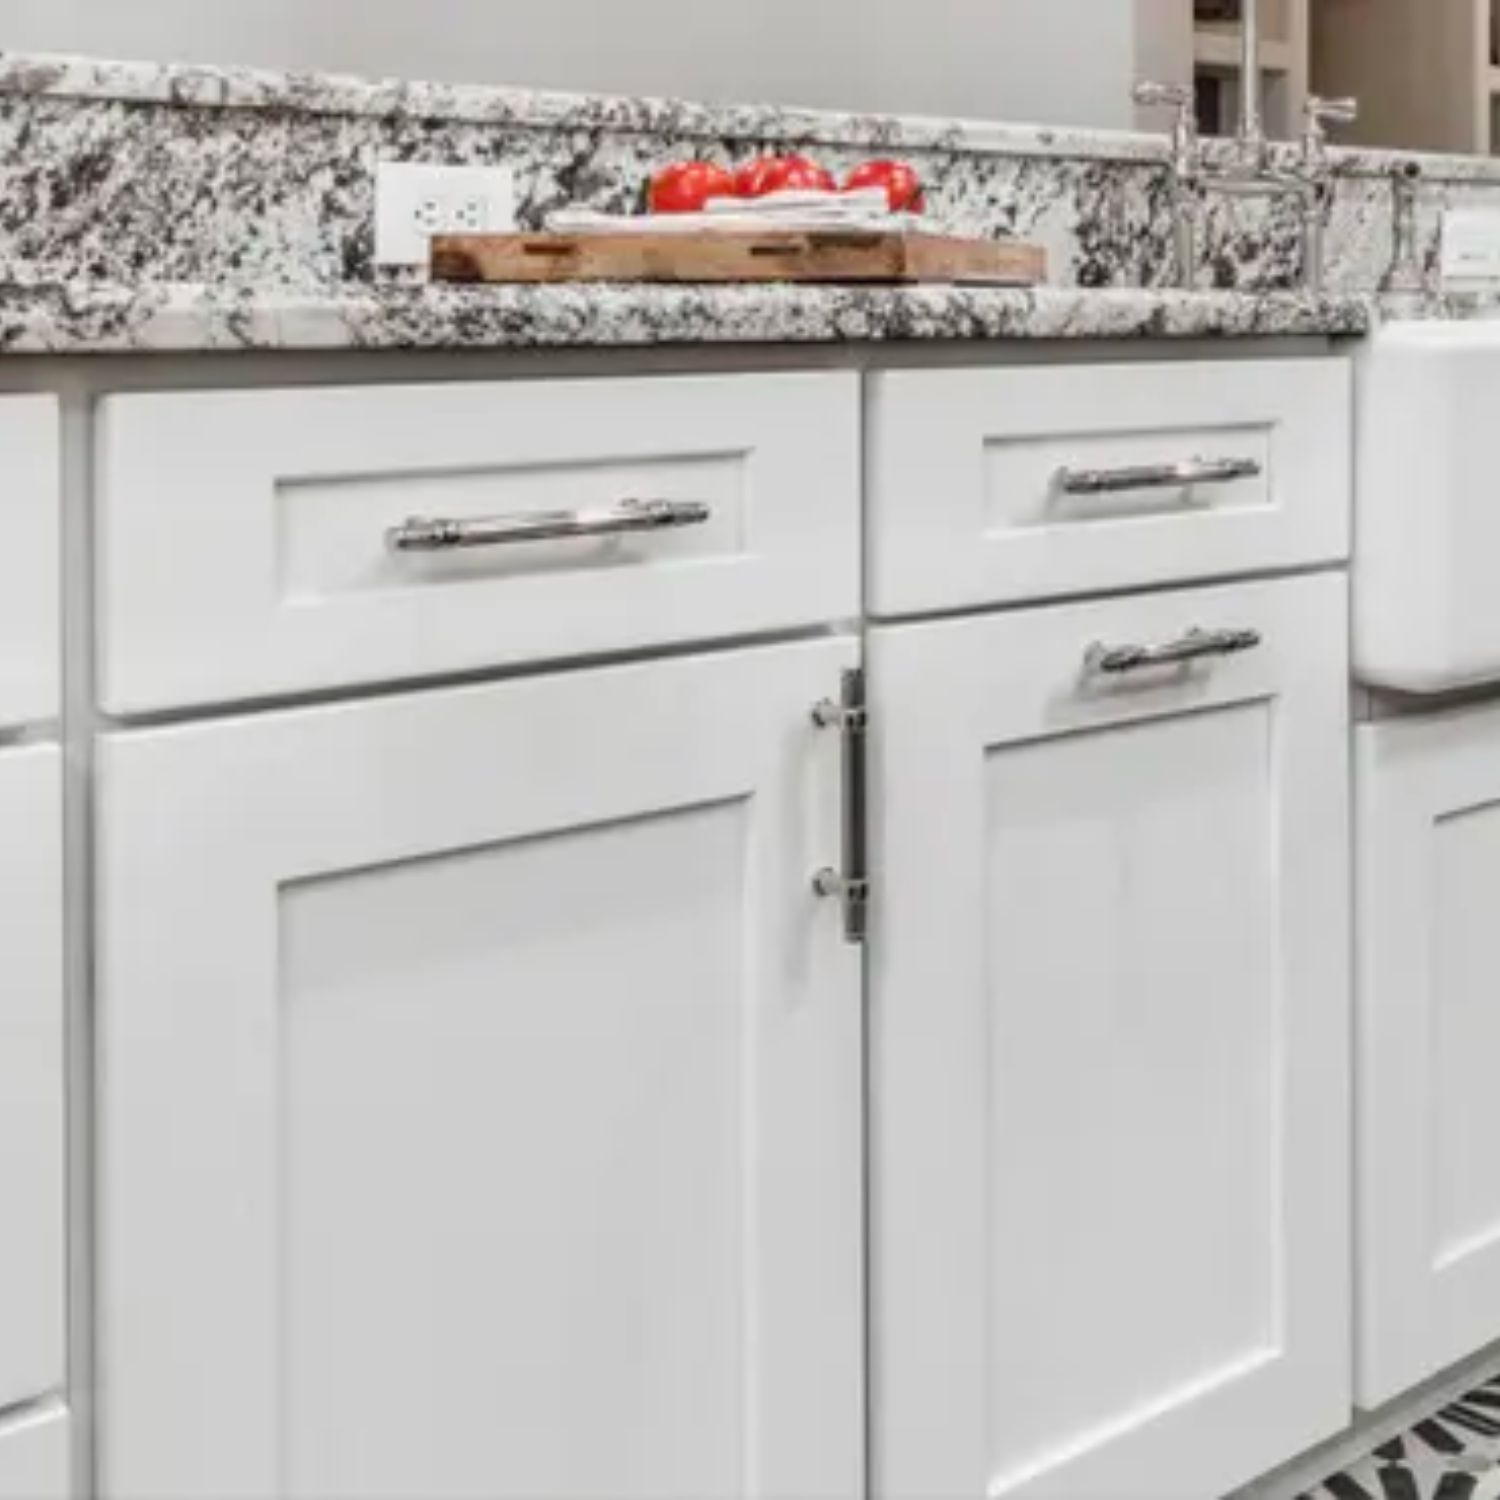 The Best Place to Buy Cabinets Option: Cabinets.com